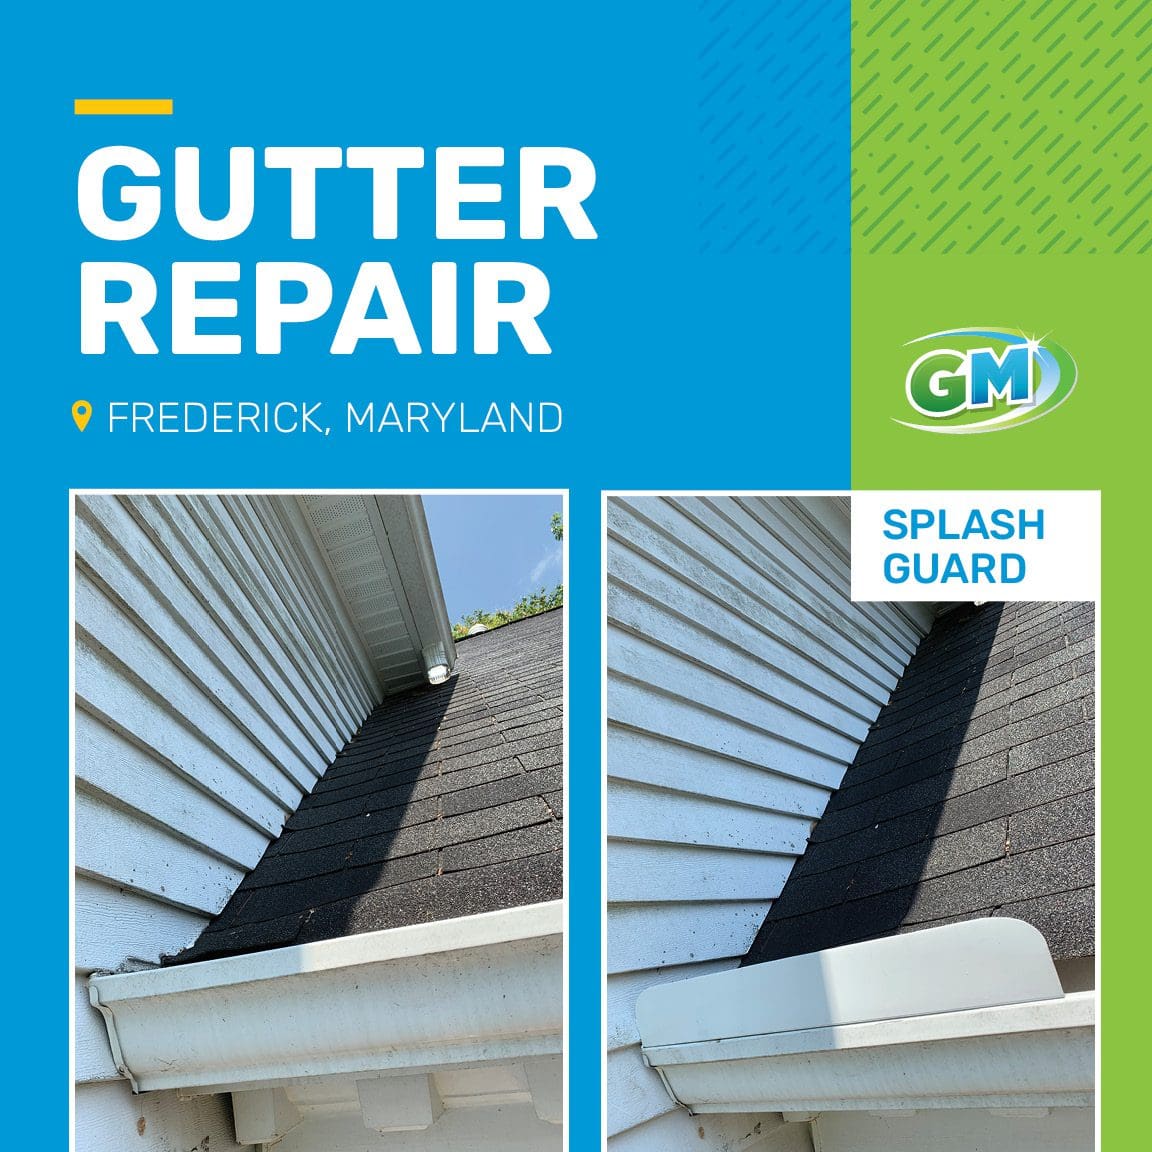 Gutter repair and splash guard installation by GutterMaid before and after pictures